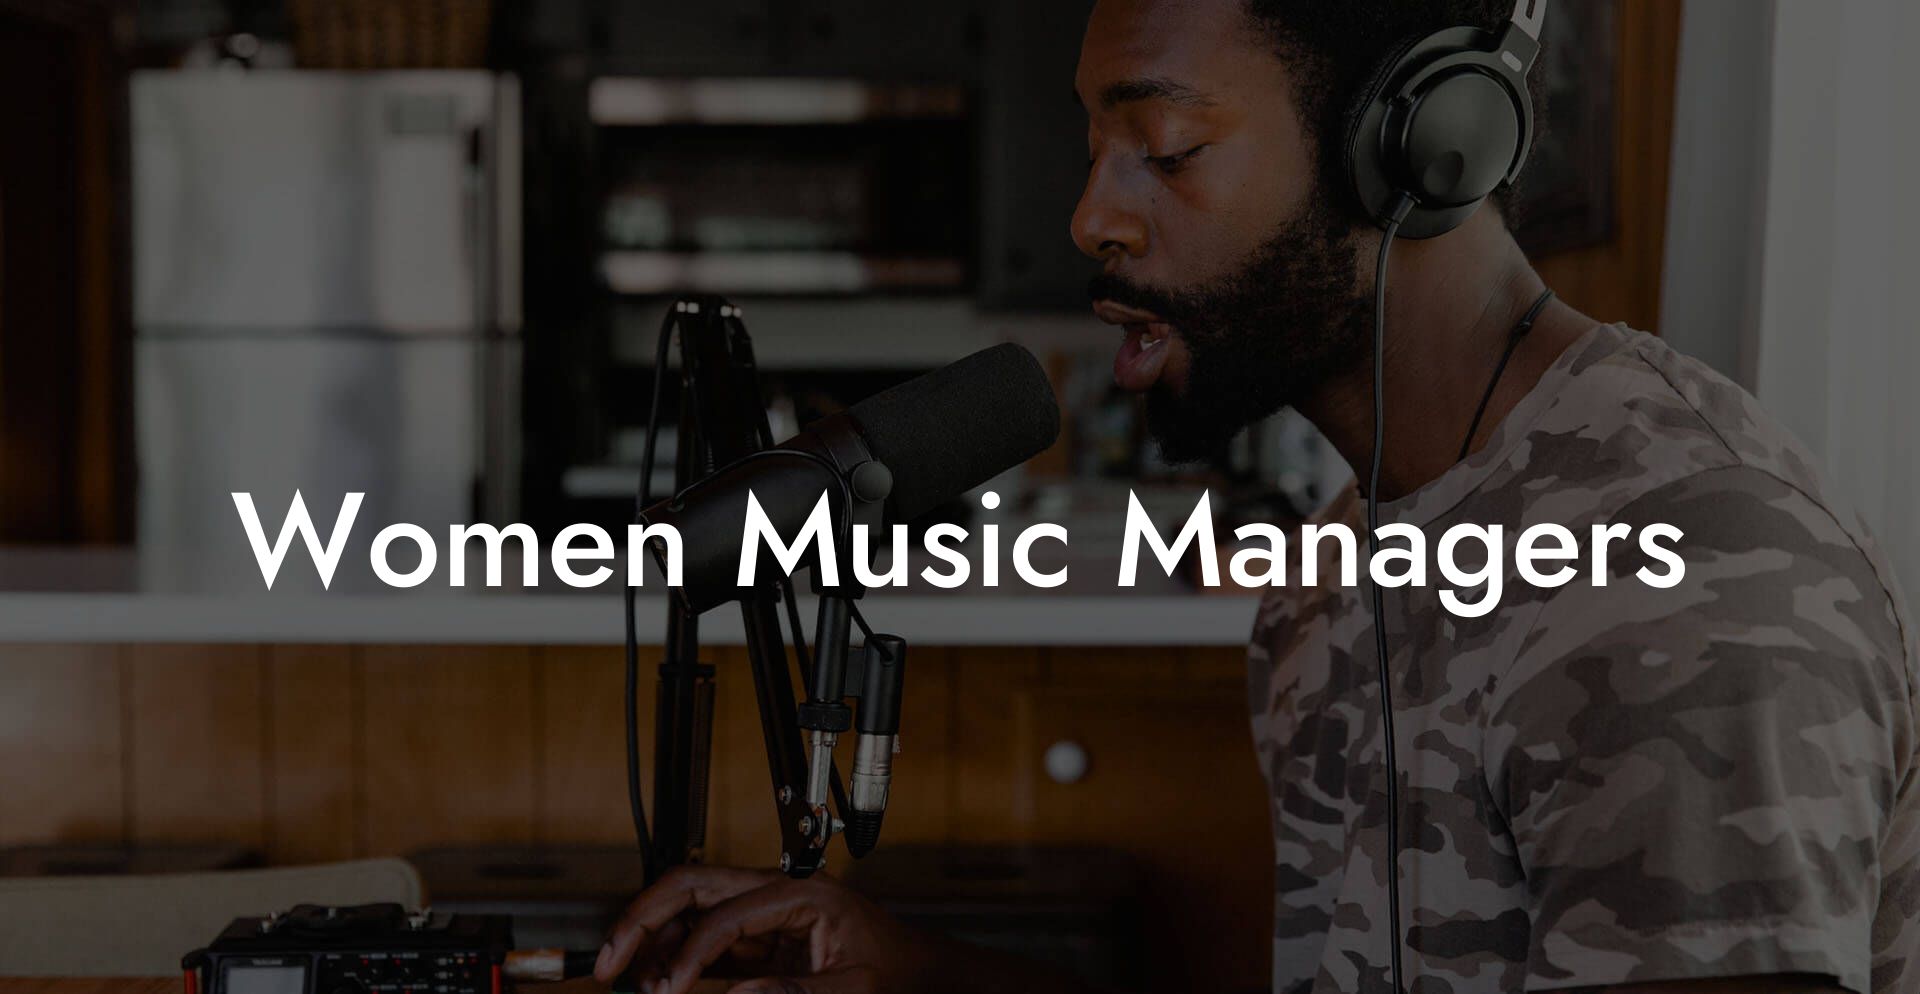 Women Music Managers